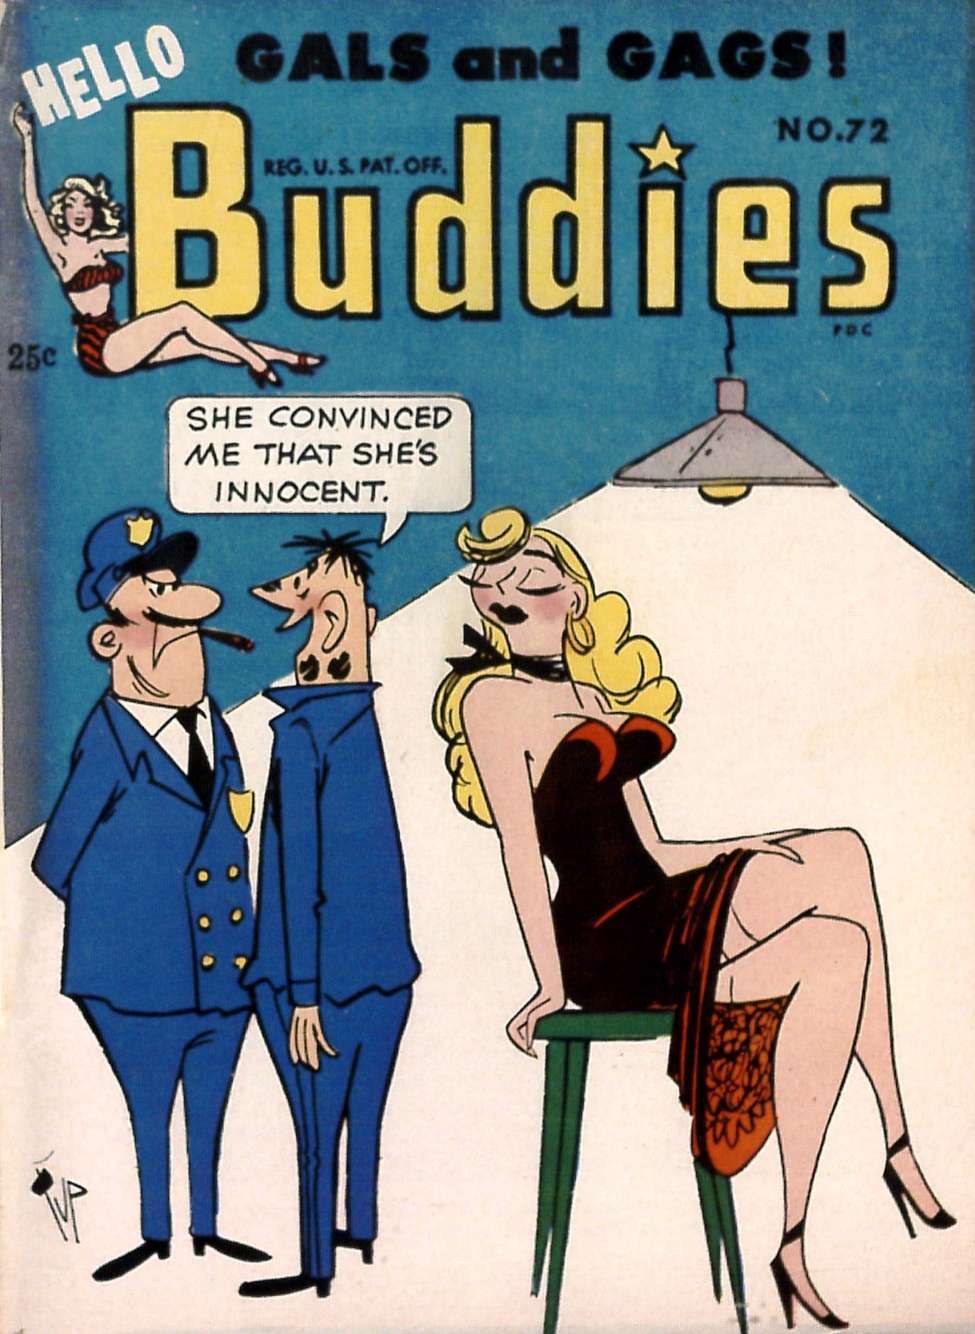 Book Cover For Hello Buddies 72